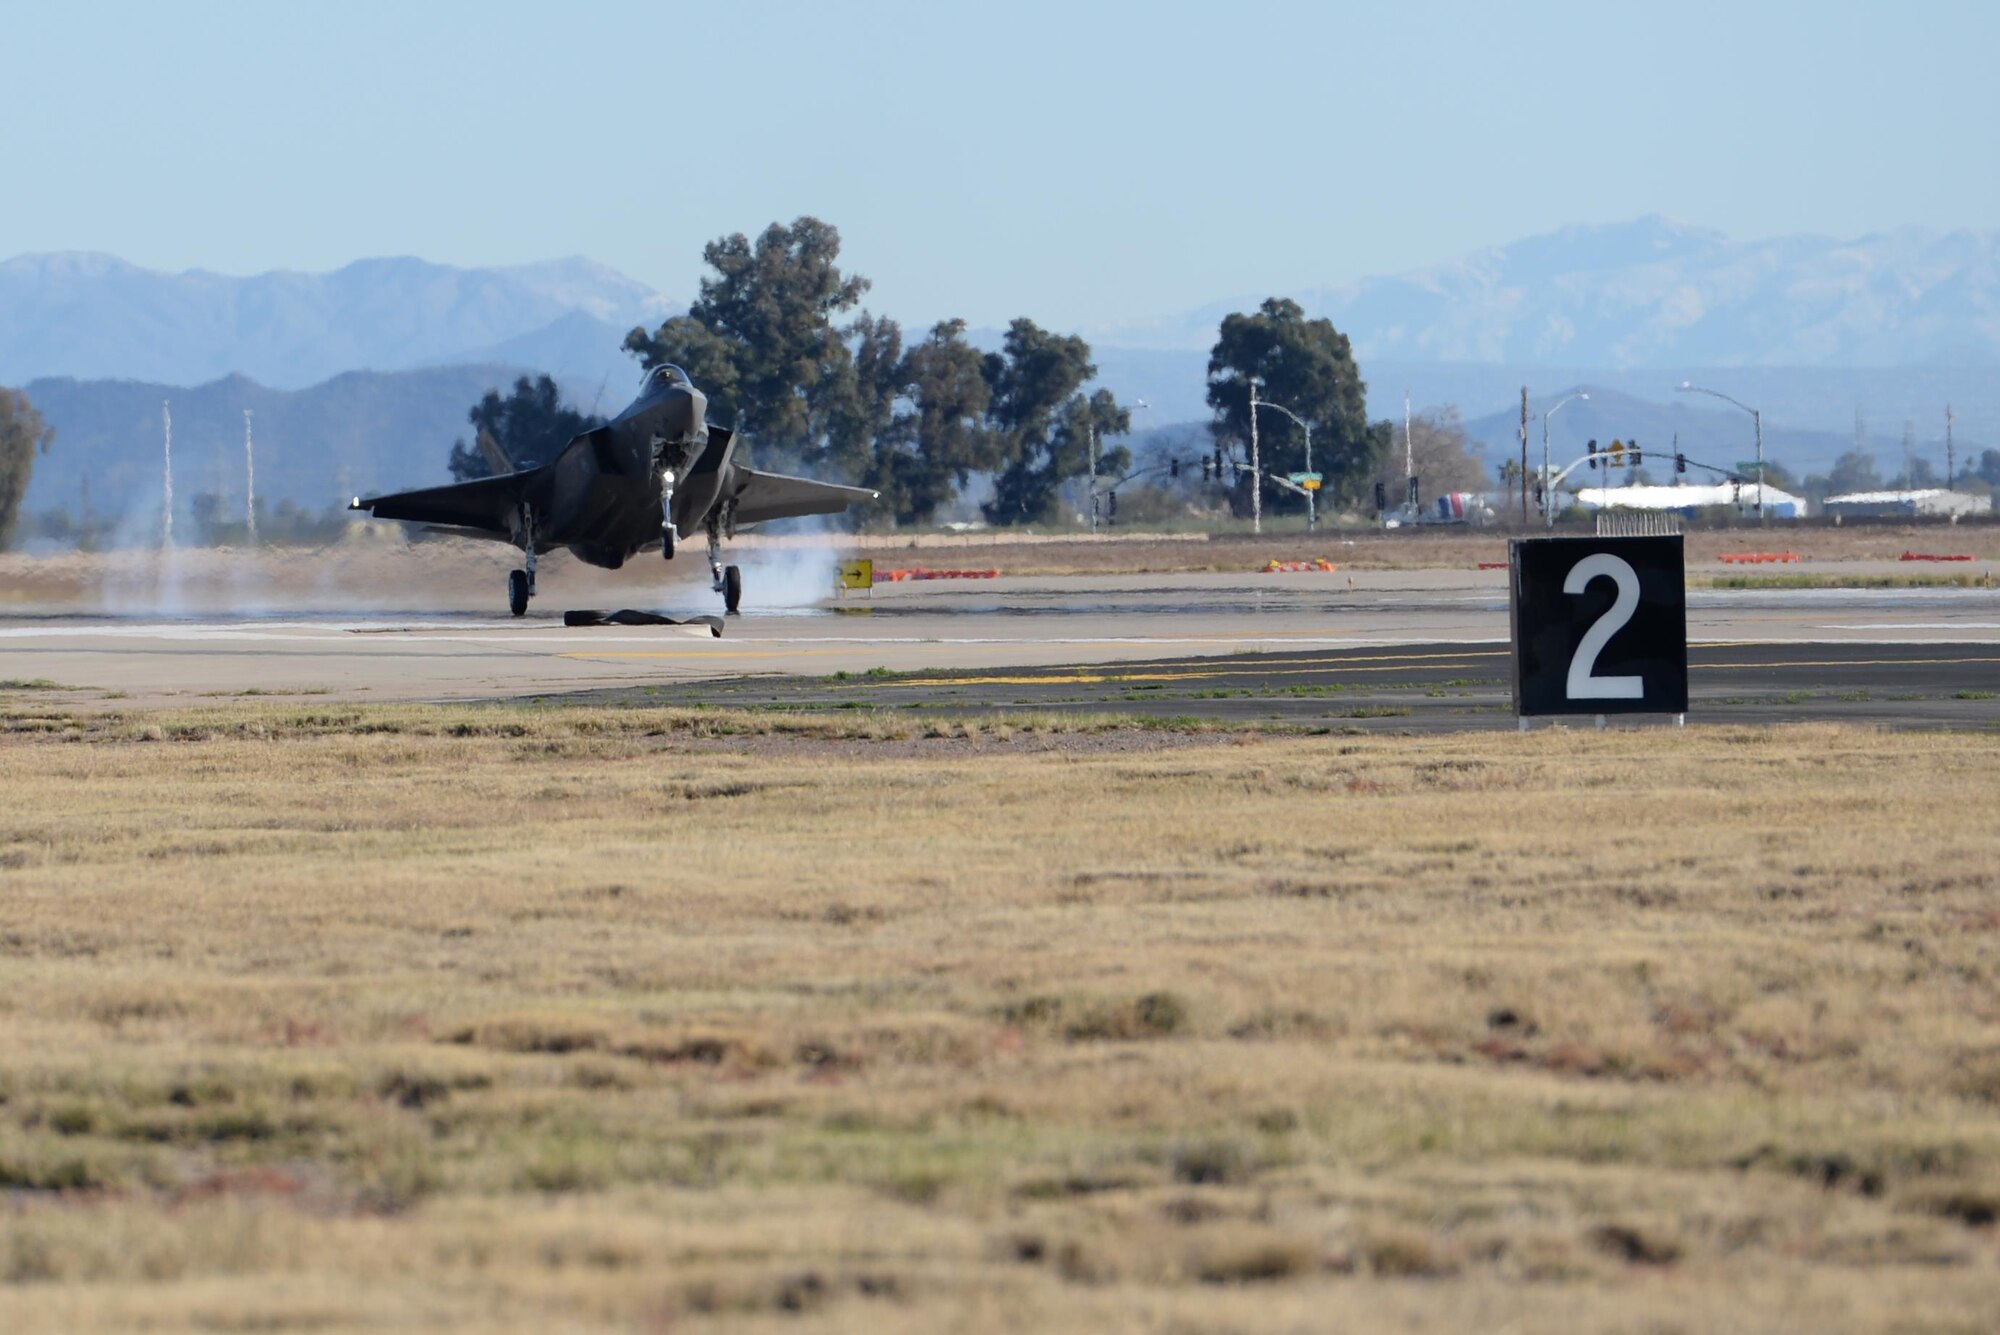 Lt. Col. Matthew Hayden, 56th Fighter Wing chief of safety and pilot attached to the 61st Fighter Squadron, lands after completing his 270th sortie in which he became the first Air Force pilot to reach 500 flight hours in the F-35, Feb. 2, 2016, at Luke Air Force Base. (U.S. Air Force photo by Airman 1st Class Ridge Shan)